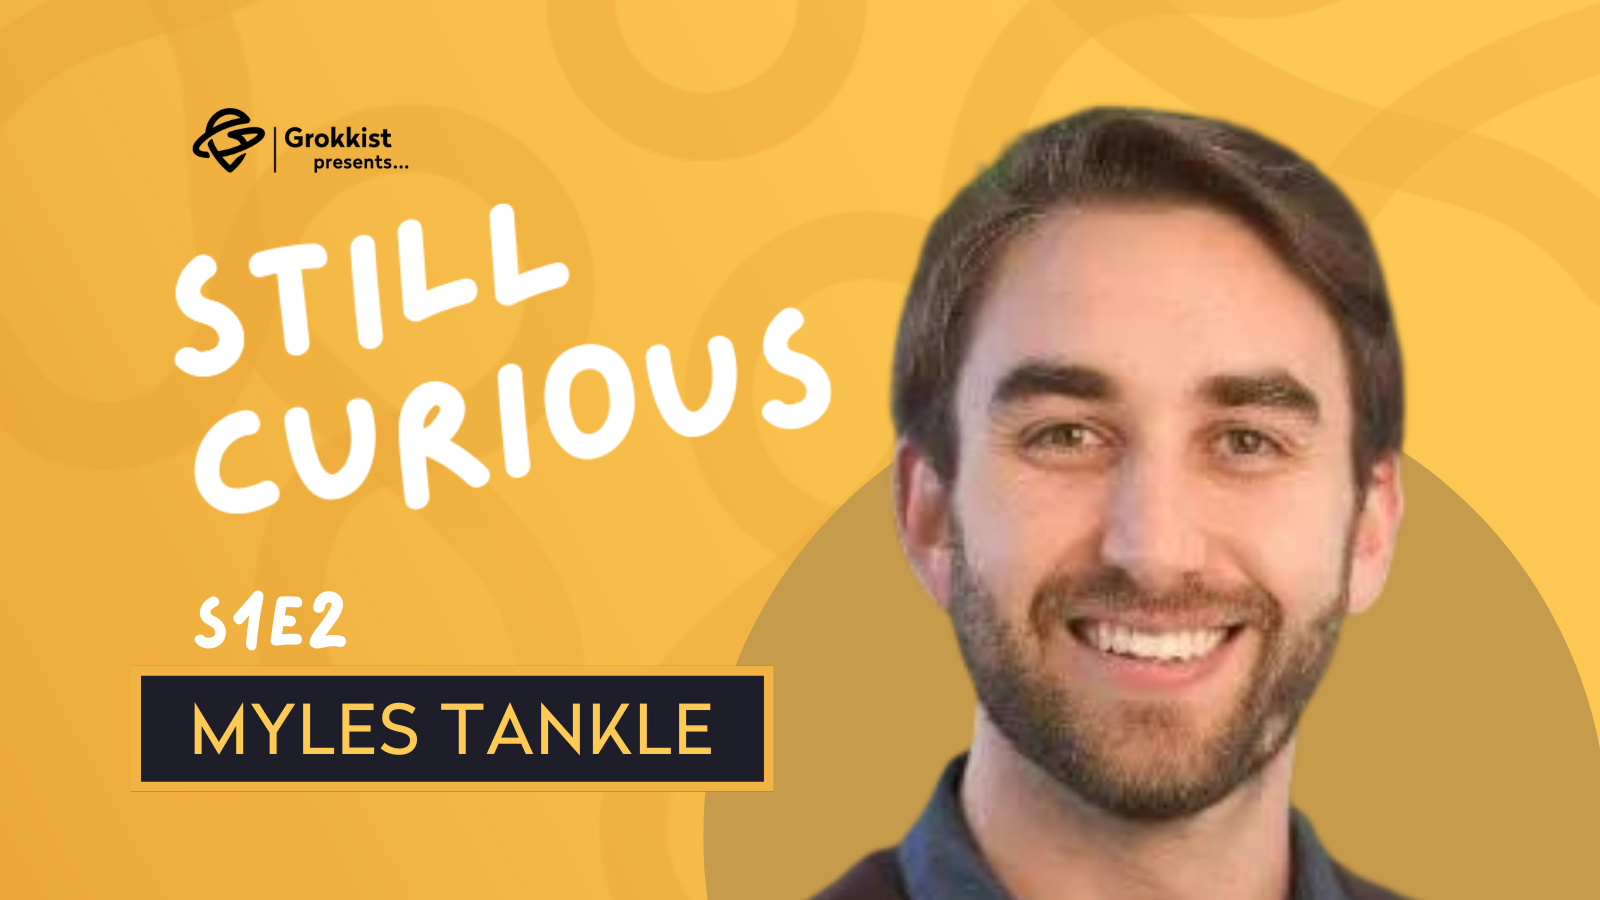 From theatre acting to change management, it's about human connection - Myles Tankle | S1E2